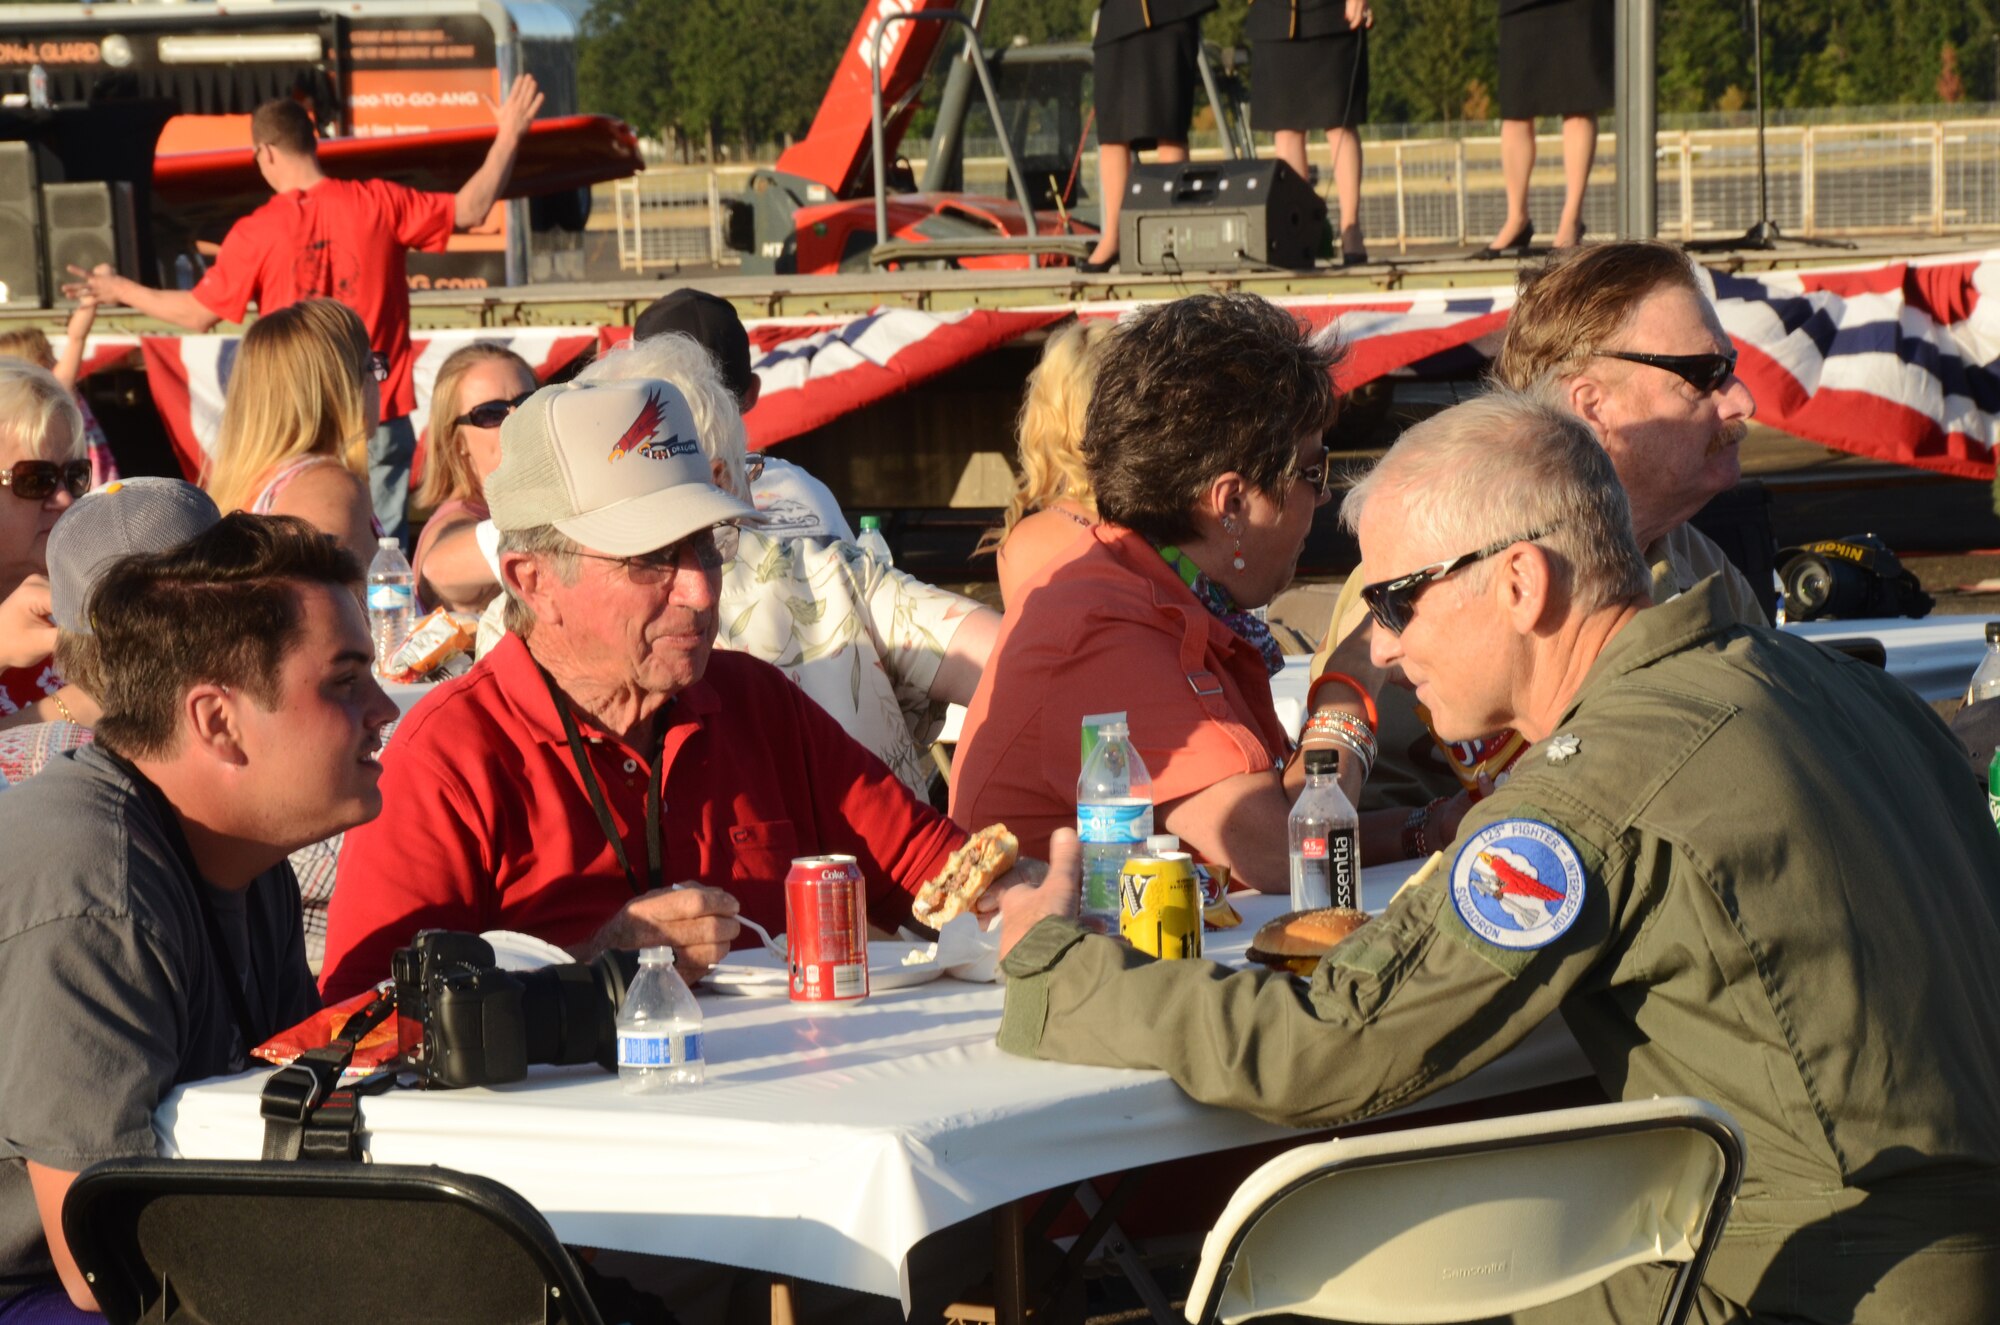 Current and retired members of the Oregon Air National Guard gather for an afterhours “All Call” celebration as part of the 75th Anniversary of the Oregon Air National Guard during the Oregon International Air Show, Hillsboro, Ore., Aug. 6, 2016. (U.S. Air National Guard photo by Tech. Sgt. John Hughel, 142nd Fighter Wing Public Affairs/Released).